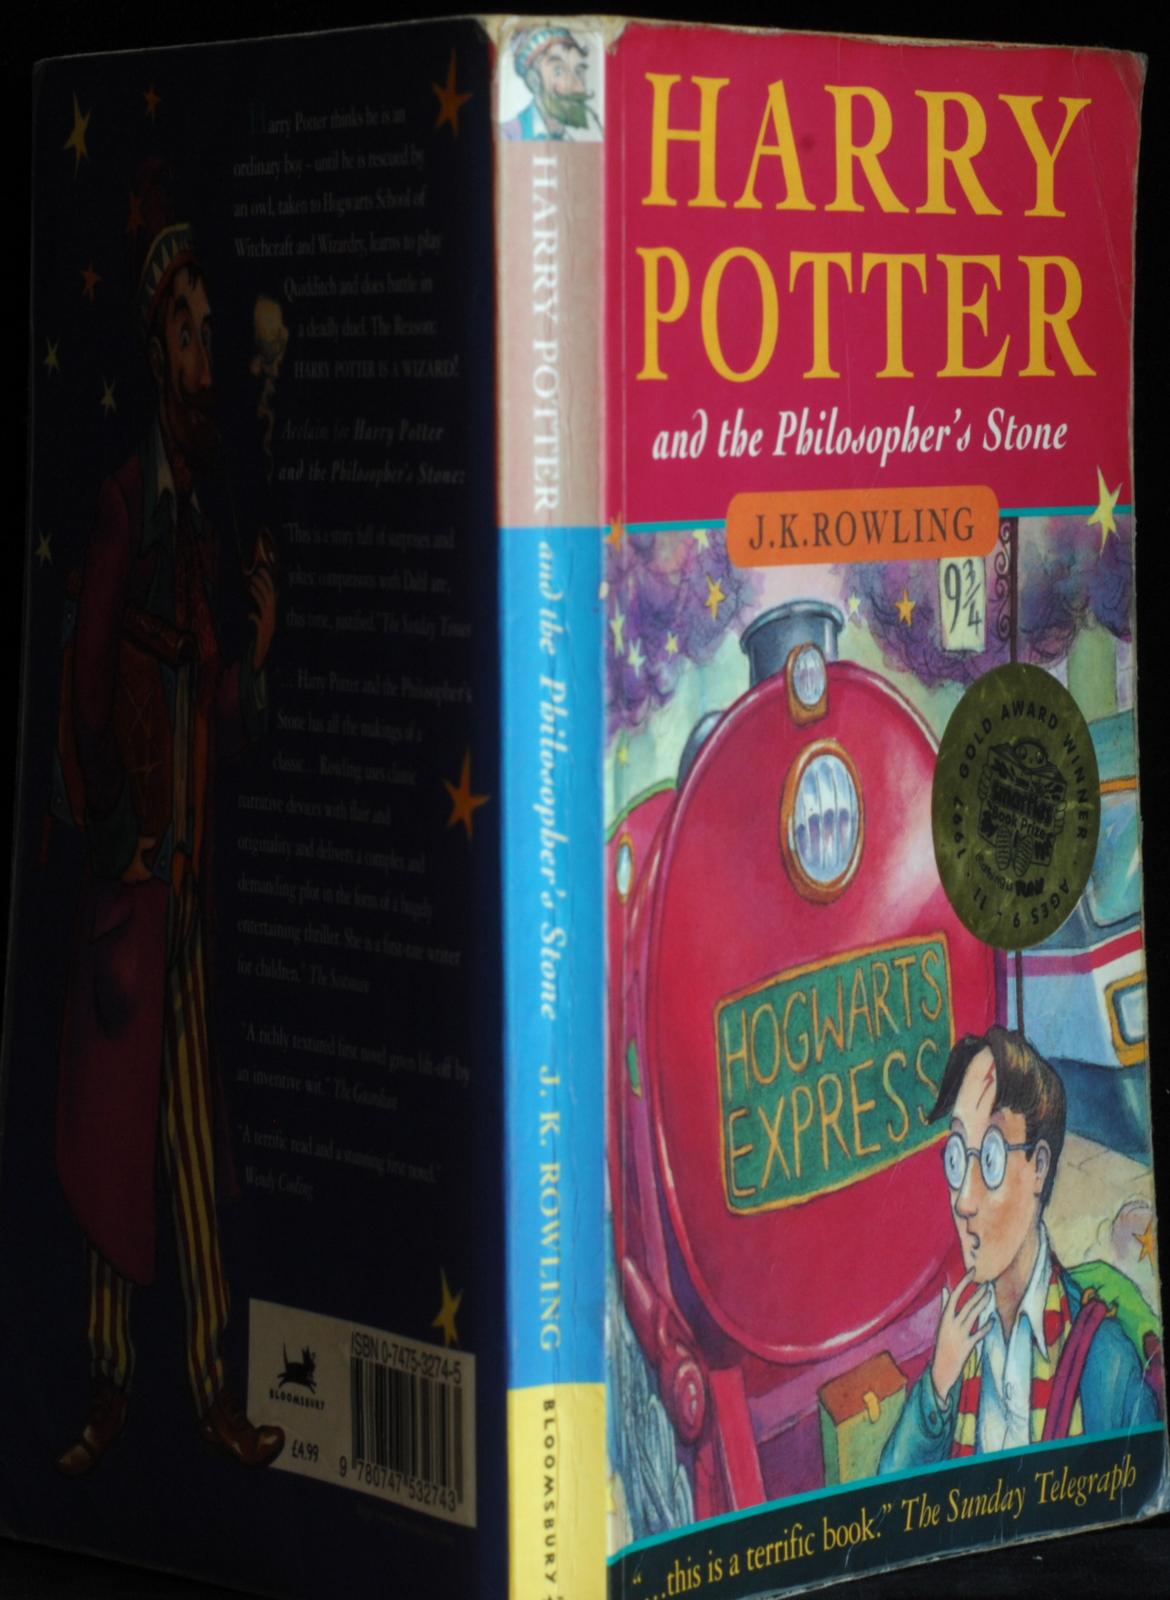 mbb005402c_-_Rowling_J_K_-_Harry_Potter_And_The_Philosopher_s_Stone.jpg